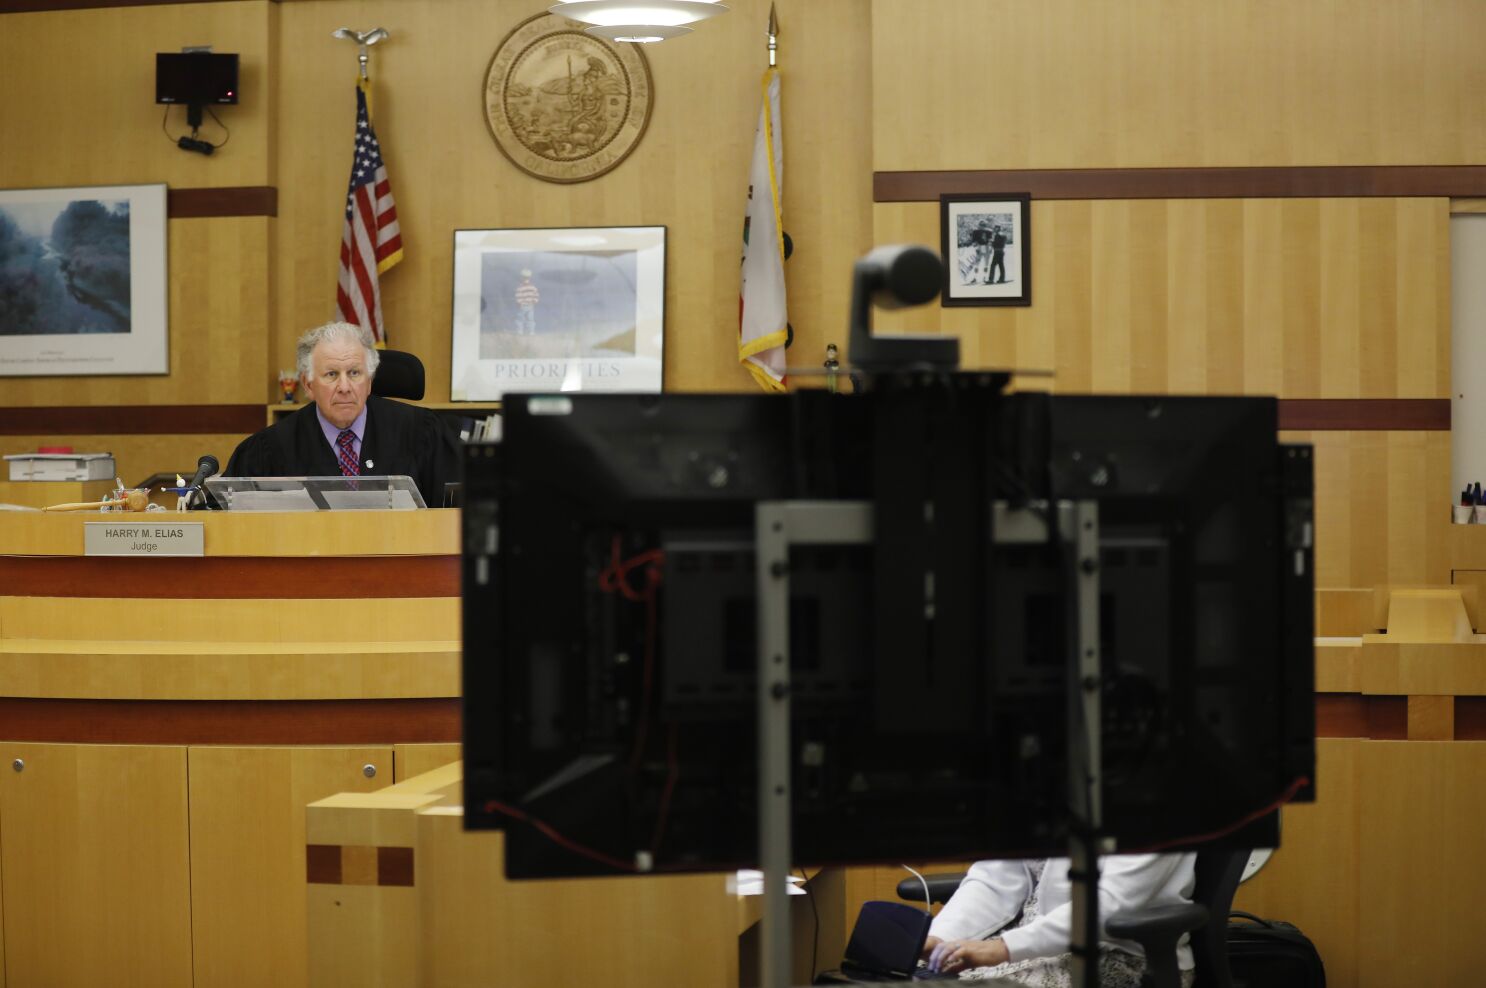 judge looking at tv screen for video conferencing